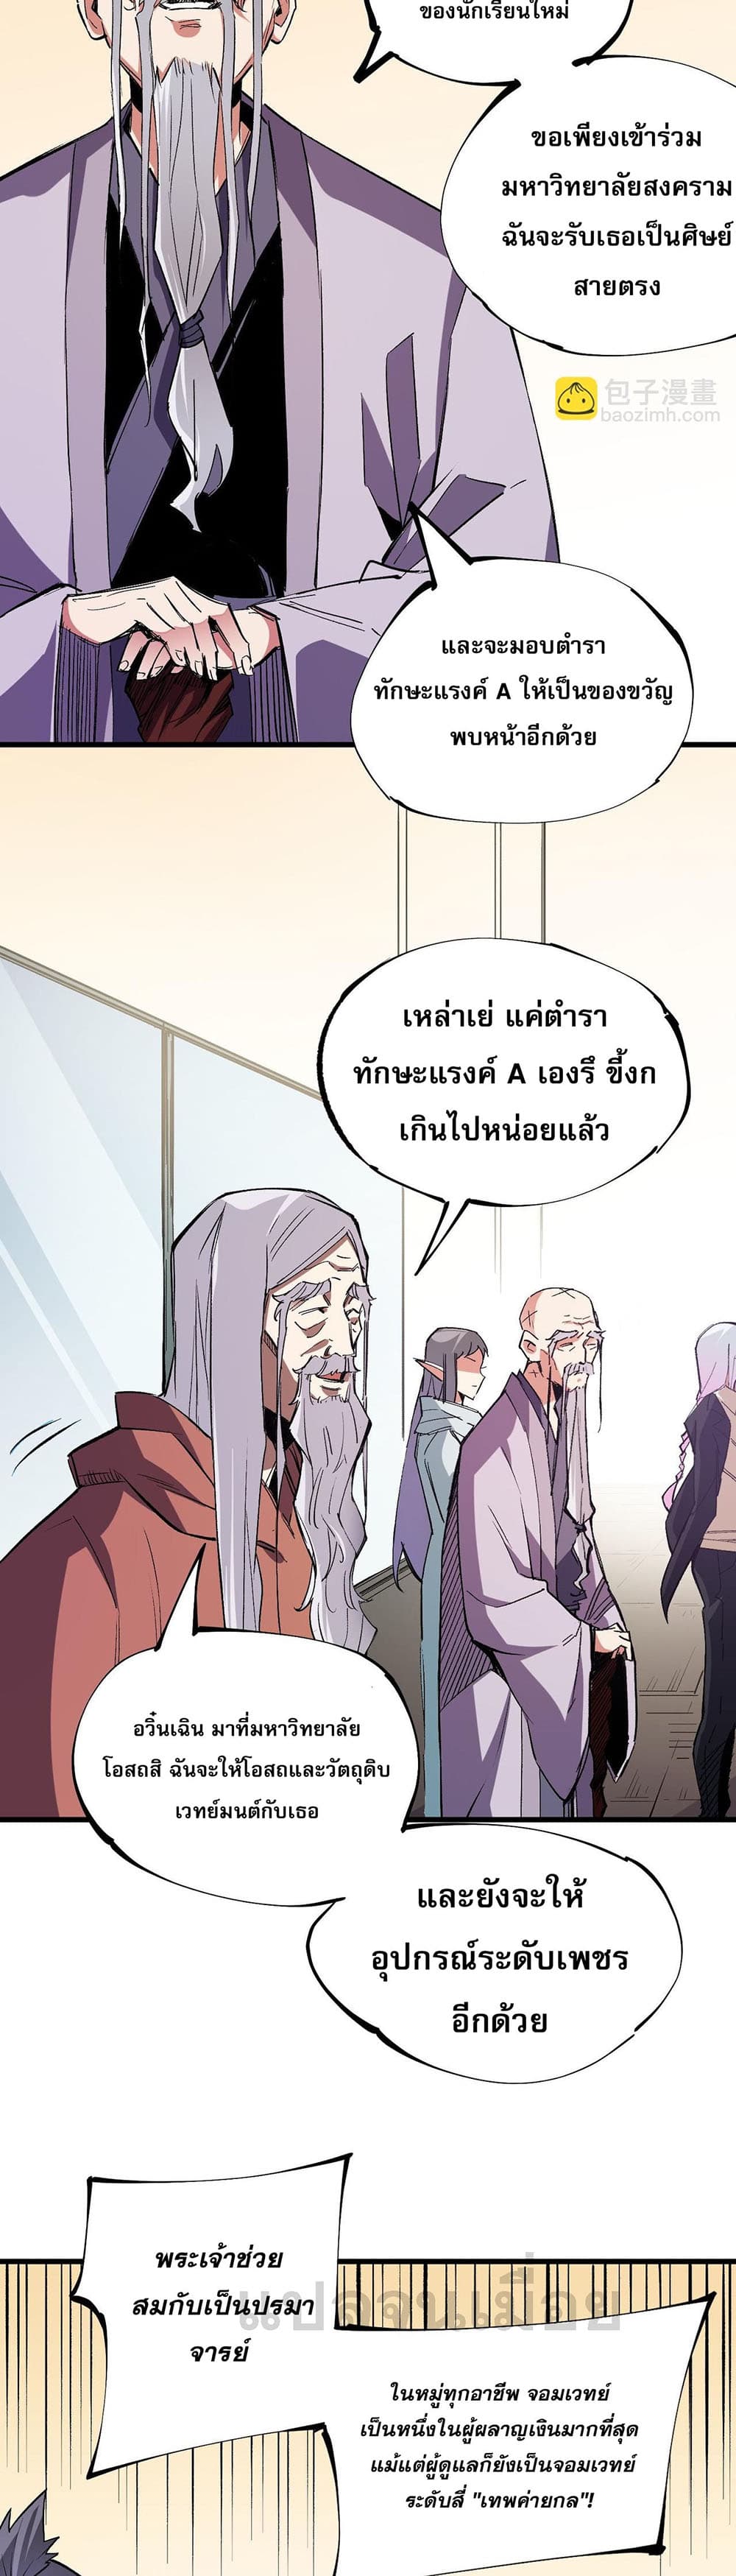 Job Changing for the Entire Population: The Jobless Me Will Terminate the Gods ฉันคือผู้เล่นไร้อาชีพที่สังหารเหล่าเทพ 19-19